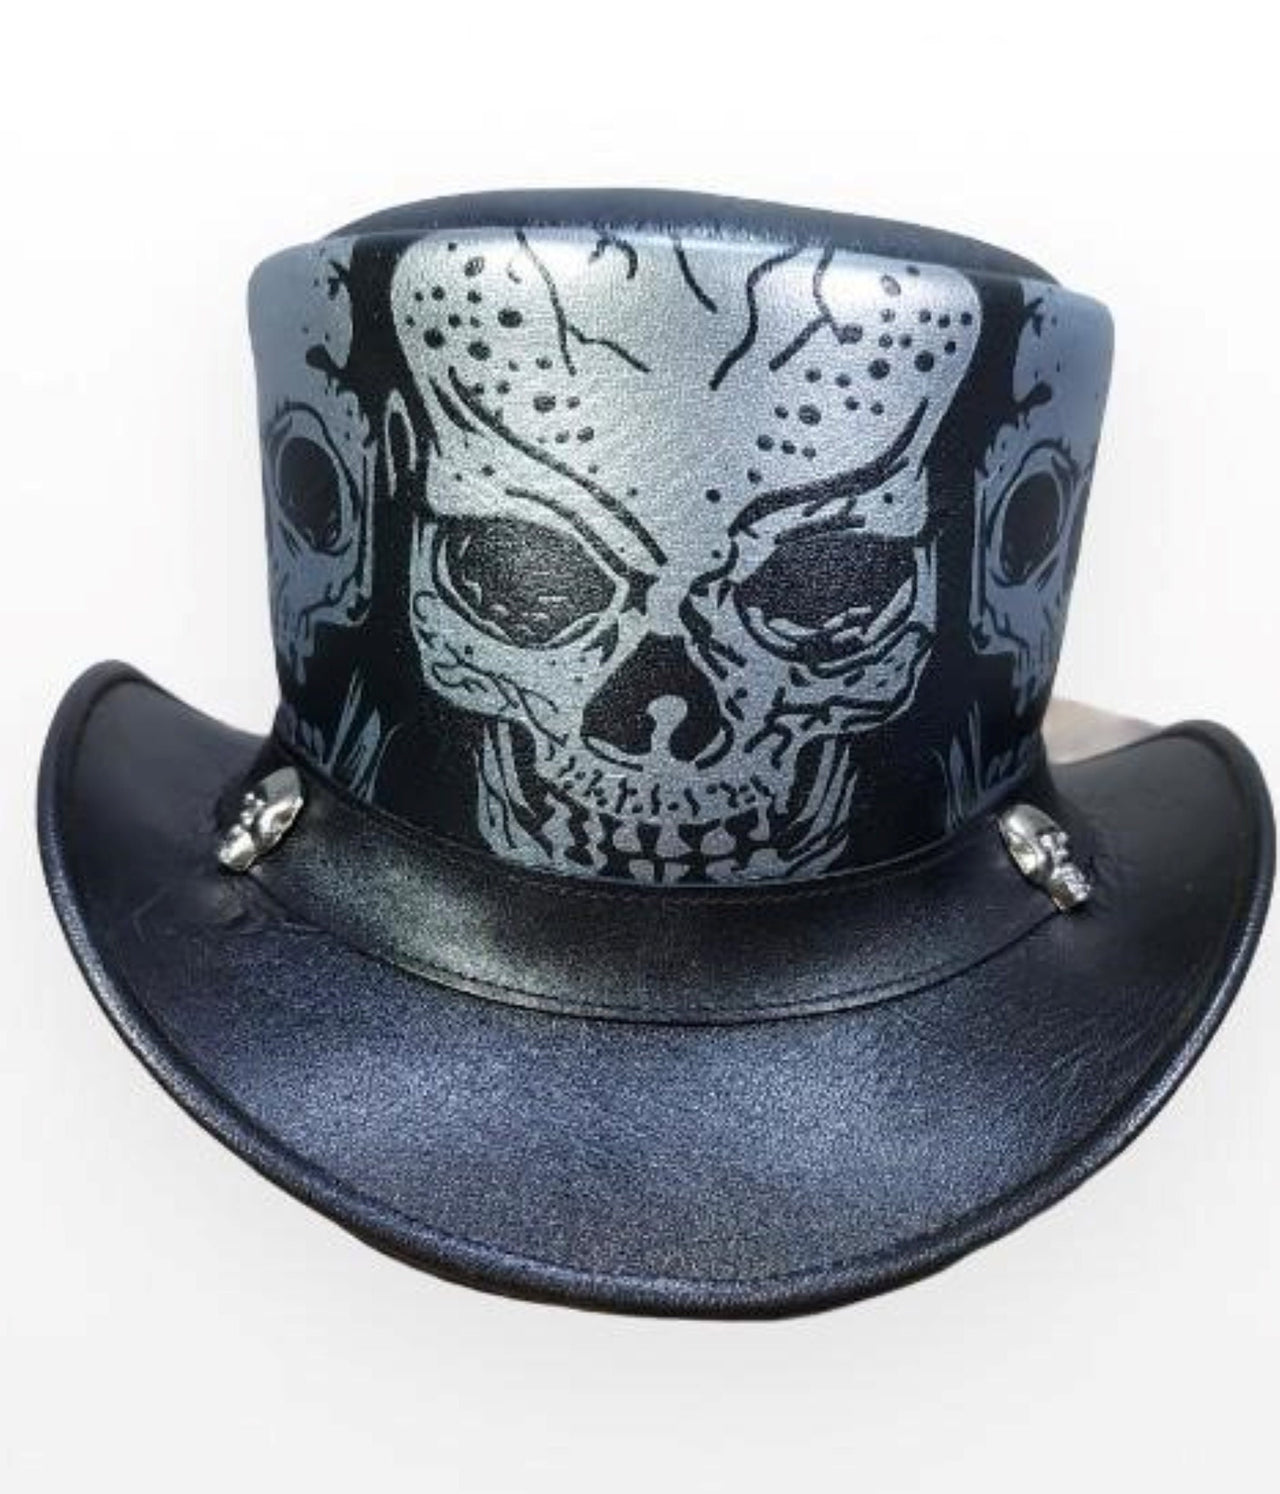 Leather Top Hat Skull Print  Black & silver Real Leather Handmade